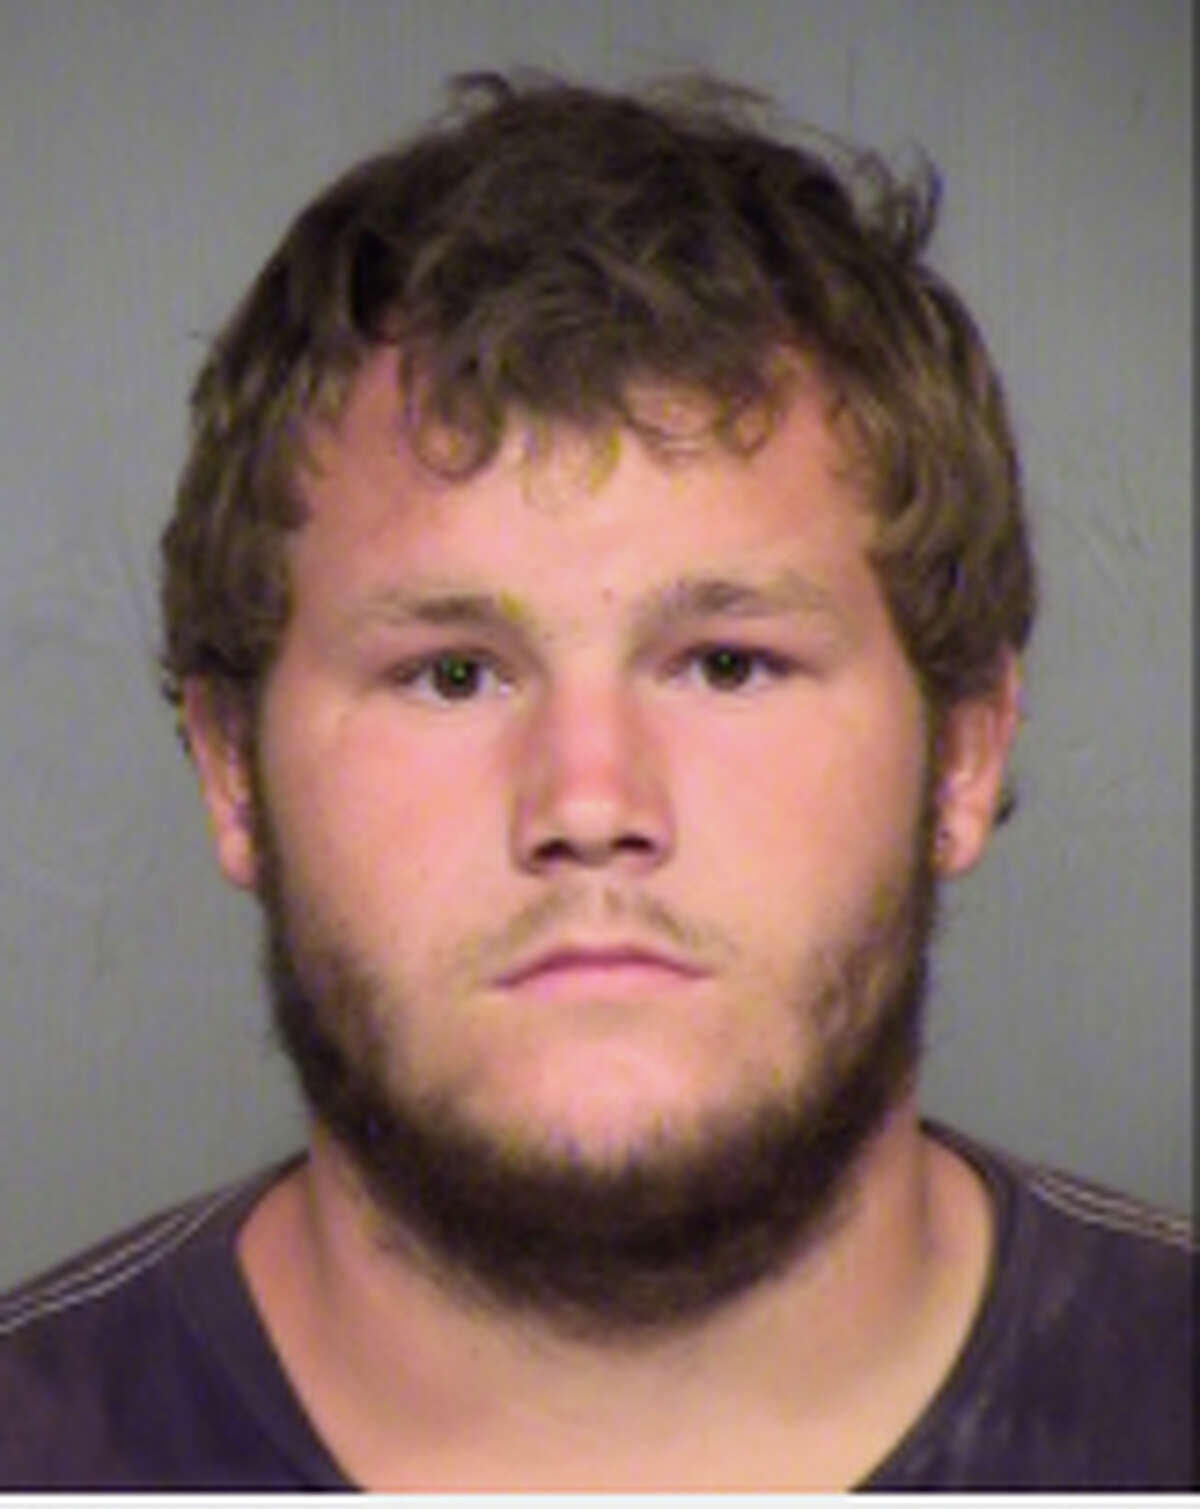 This photo provided by Maricopa County Sheriff's Office shows Leslie Allen Merritt. Merritt, who is the suspect in a series of Phoenix freeway shootings was arrested after trying to sell a gun at a pawn shop. He is expected to make an initial appearance in court Saturday, Sept. 19, 2015, a day after he was arrested at a Wal-Mart in Glendale, Ariz., a suburb west of Phoenix. Merritt was taken into custody on Friday, said Daniel Scarpinato, a spokesman for Gov. Doug Ducey. (Maricopa County Sheriff's Office via AP)